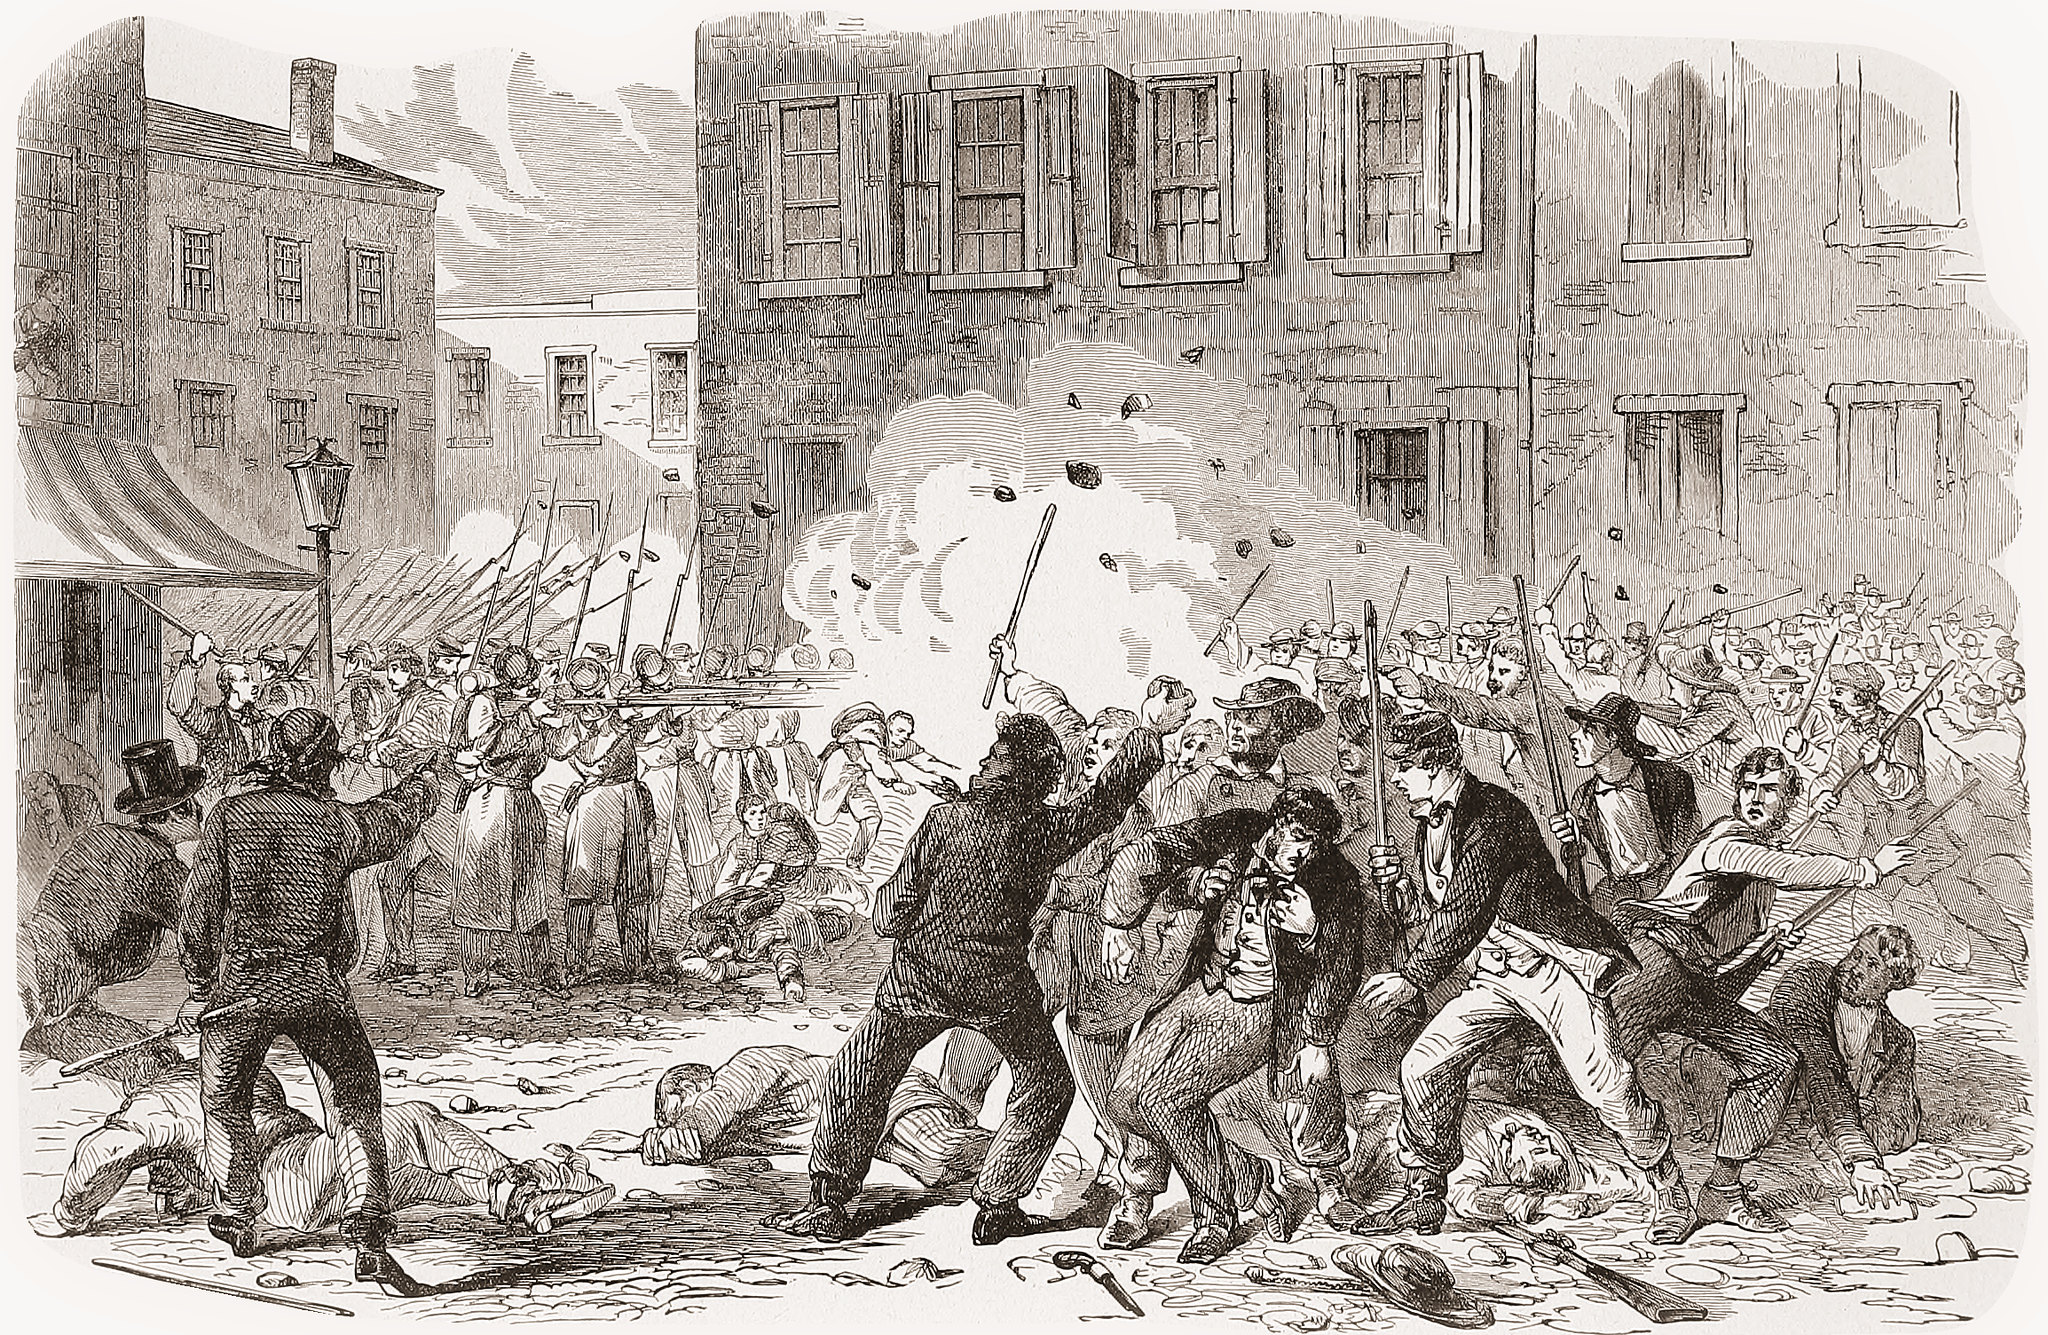 First Blood -- The Sixth Massachusetts Regiment Fighting their way through Baltimore, April 19, 1861